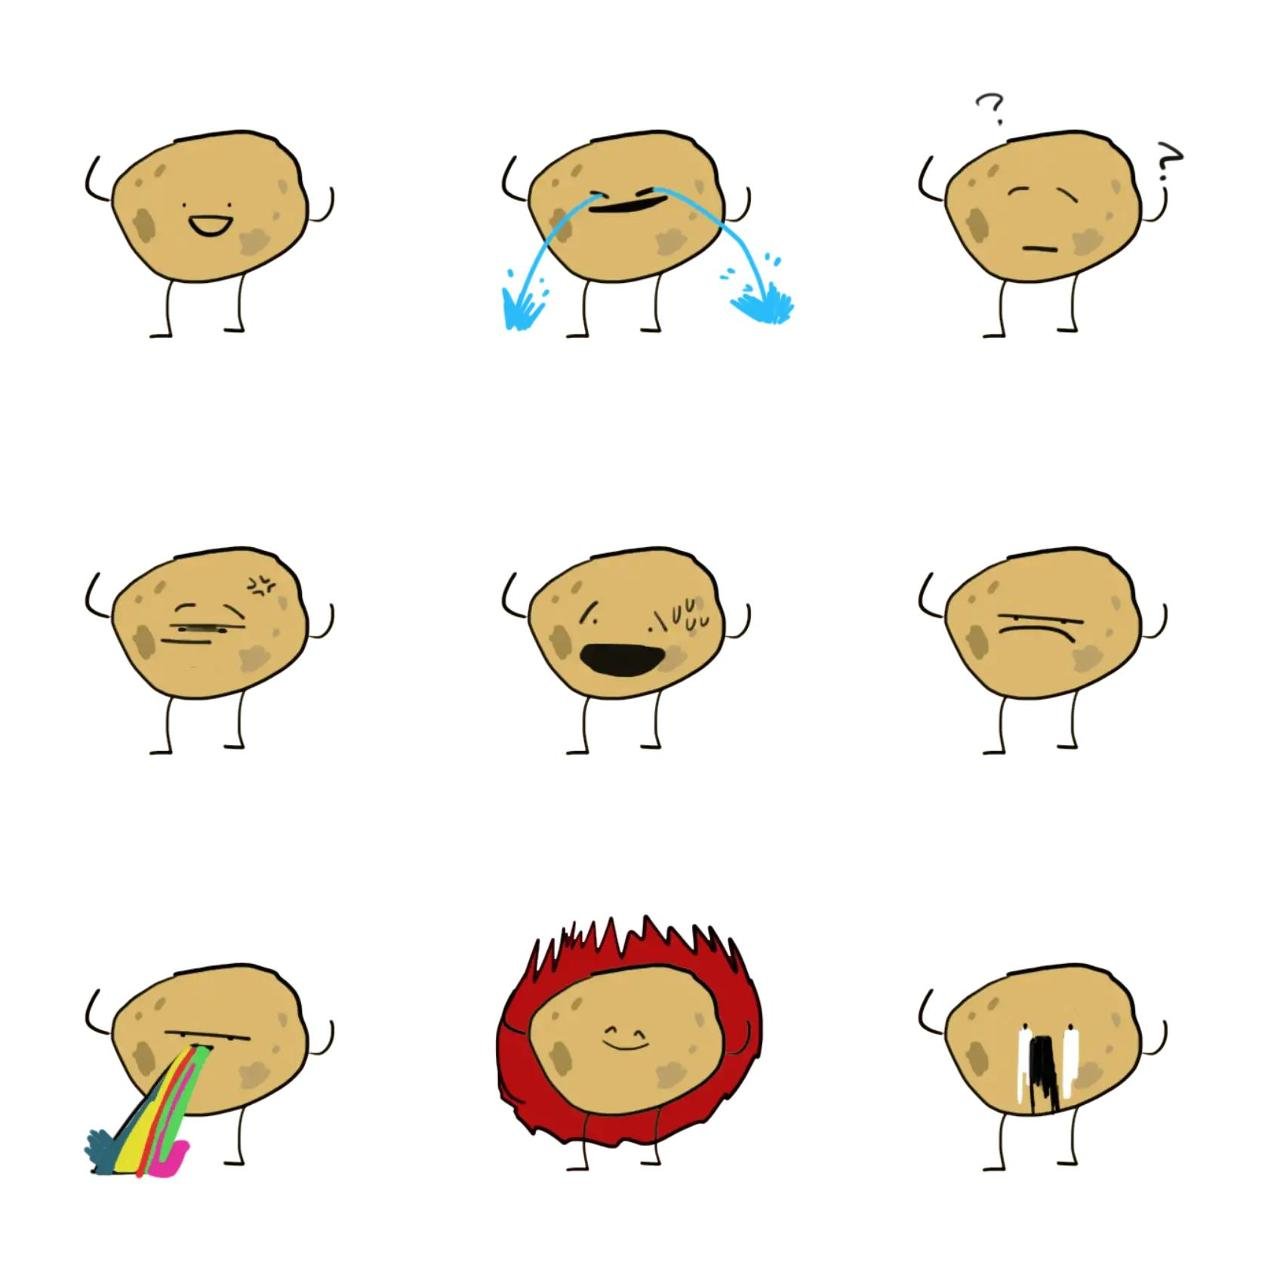 A small potato Animation/Cartoon,Gag sticker pack for Whatsapp, Telegram, Signal, and others chatting and message apps